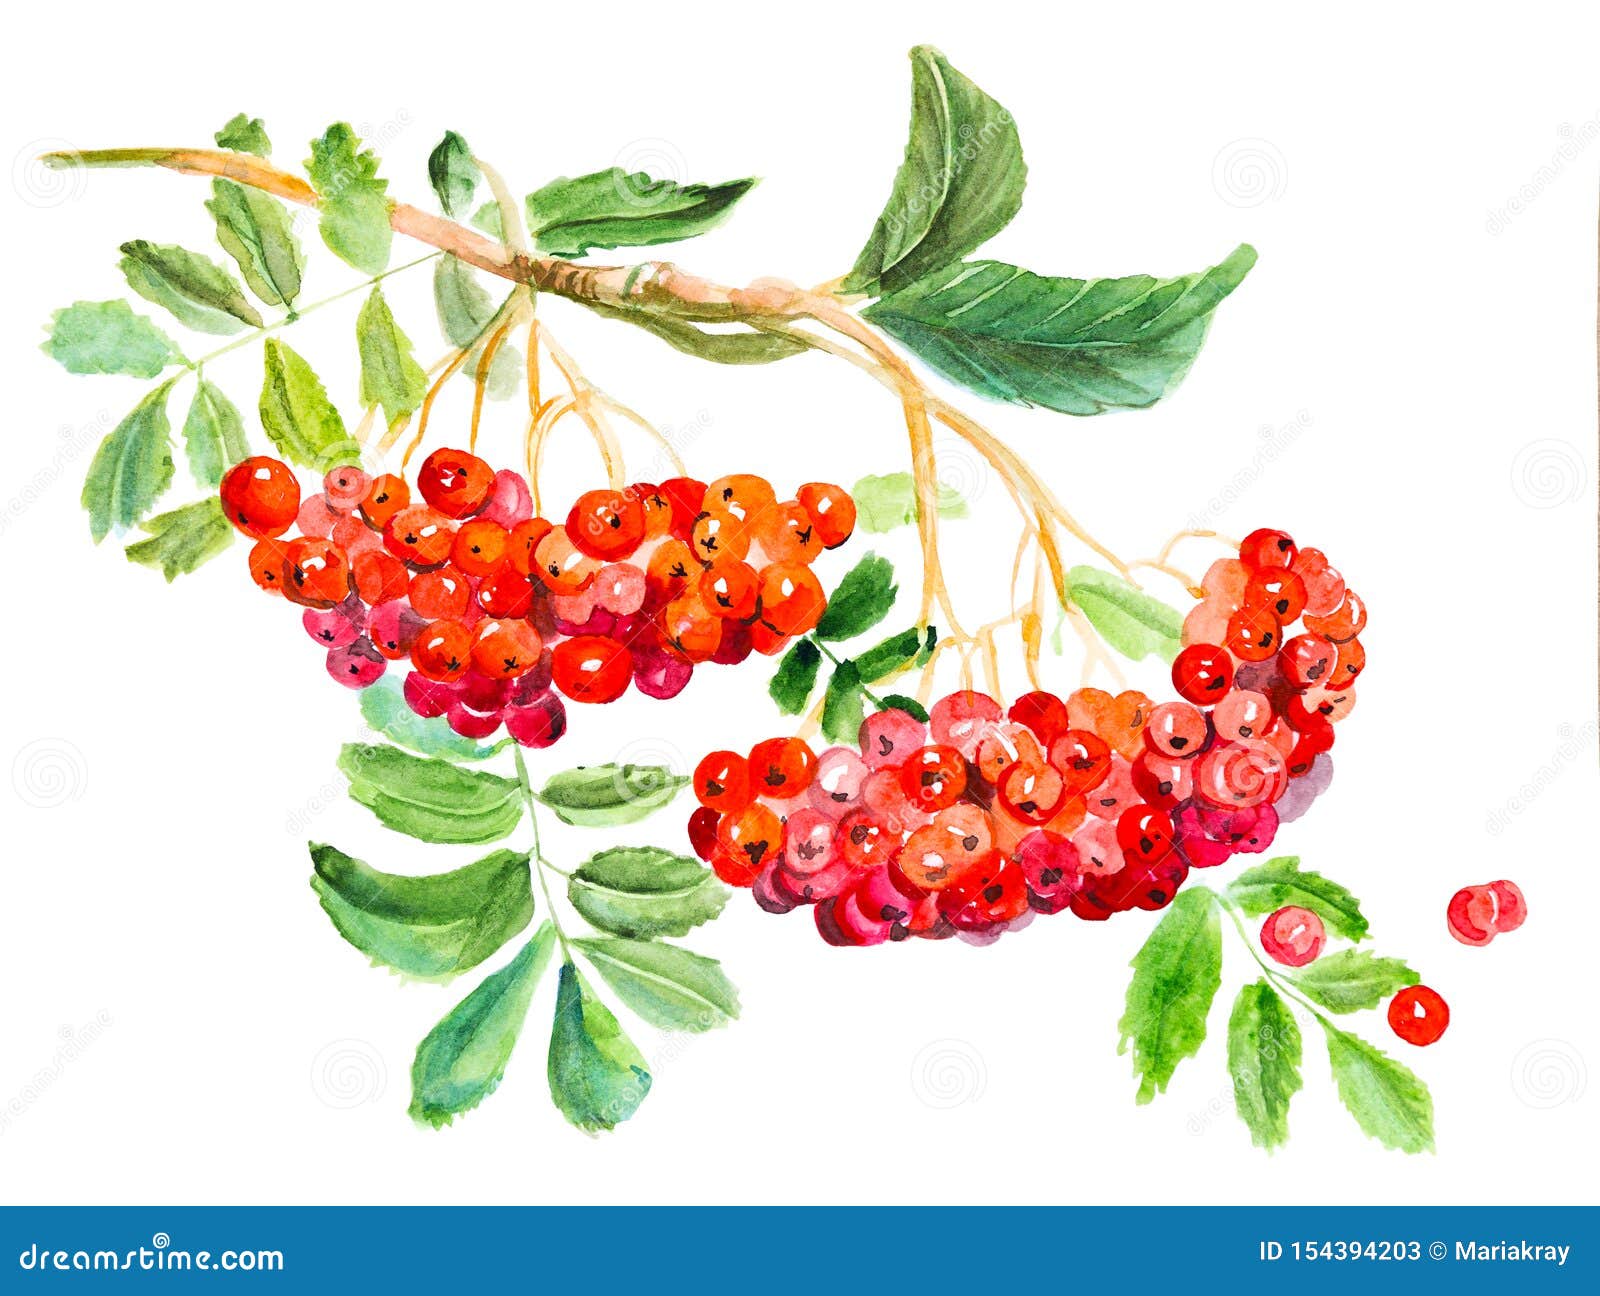 Red Viburnum Opulus, Common Name Guelder-rose, Branch with Leaves and ...